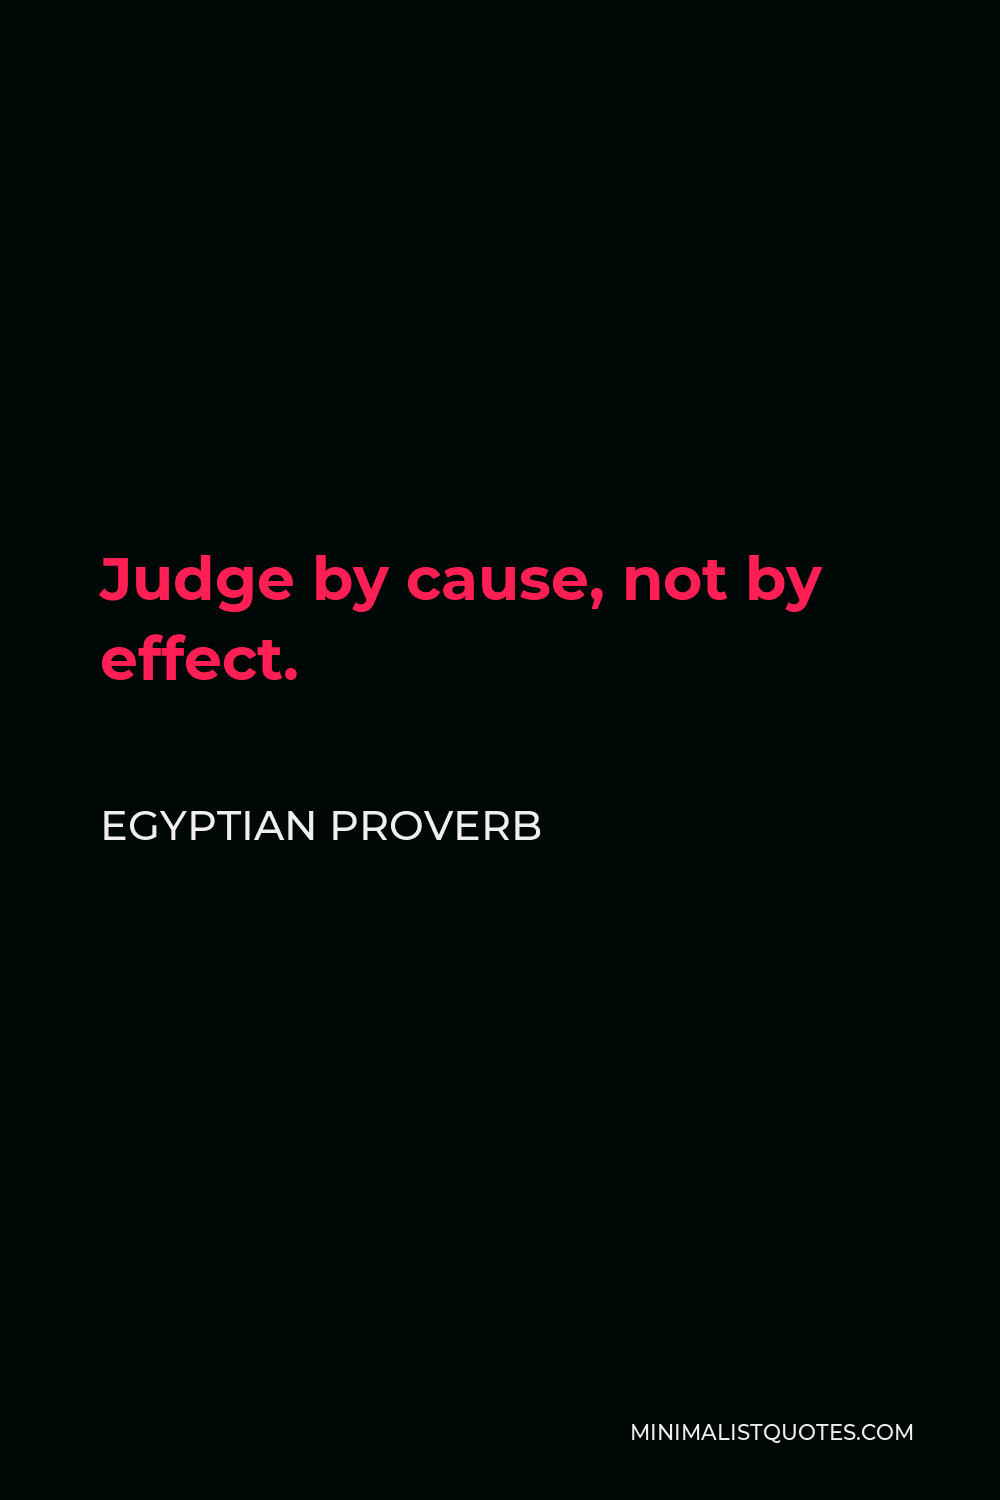 Egyptian Proverb Quote - Judge by cause, not by effect.